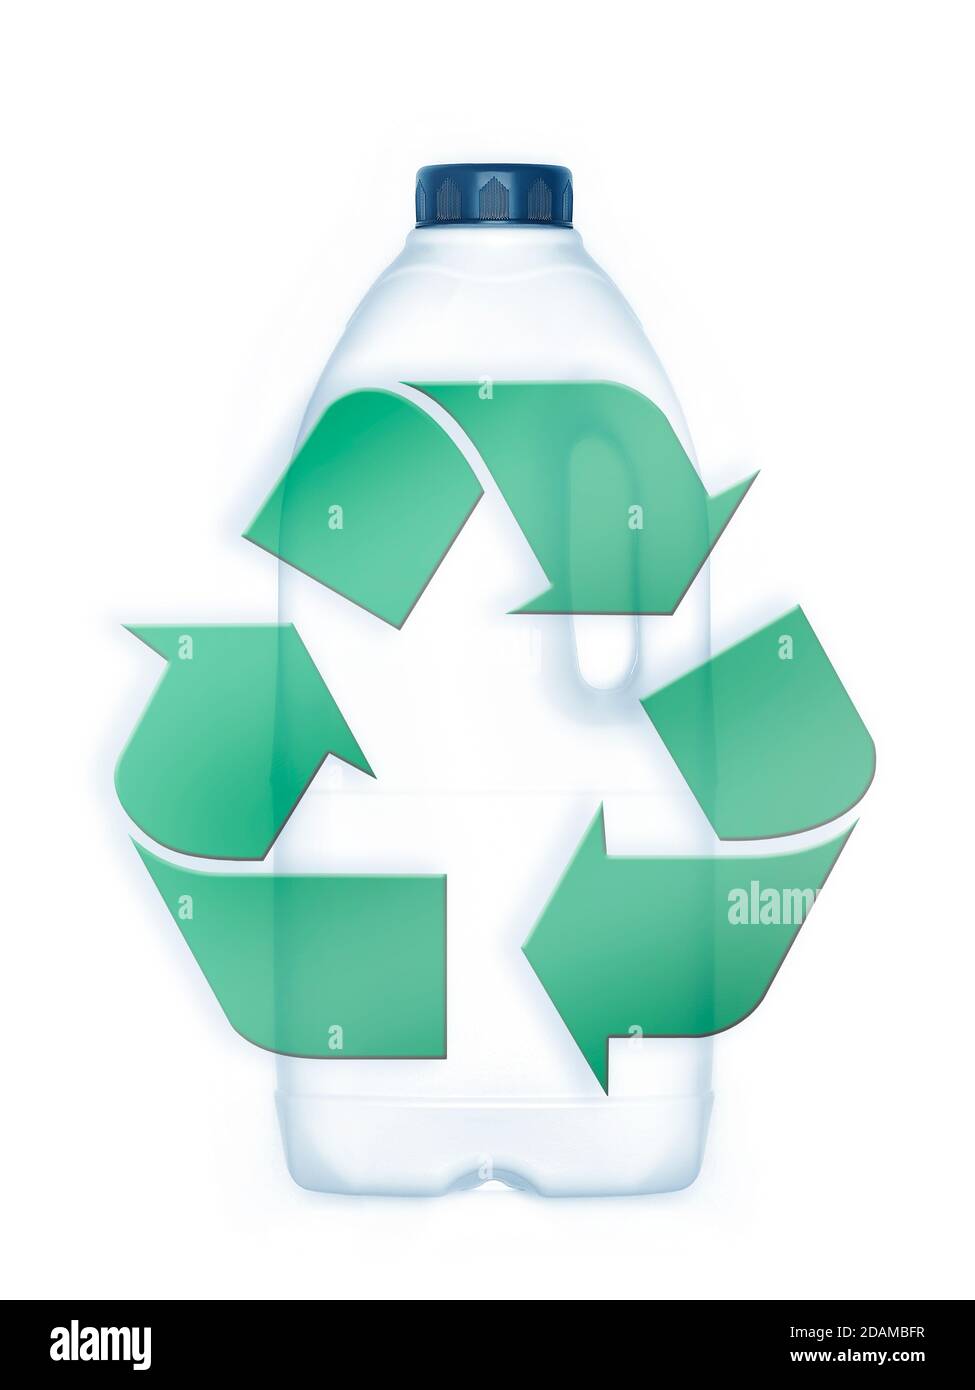 Plastic bottle with recycling symbol Stock Photo